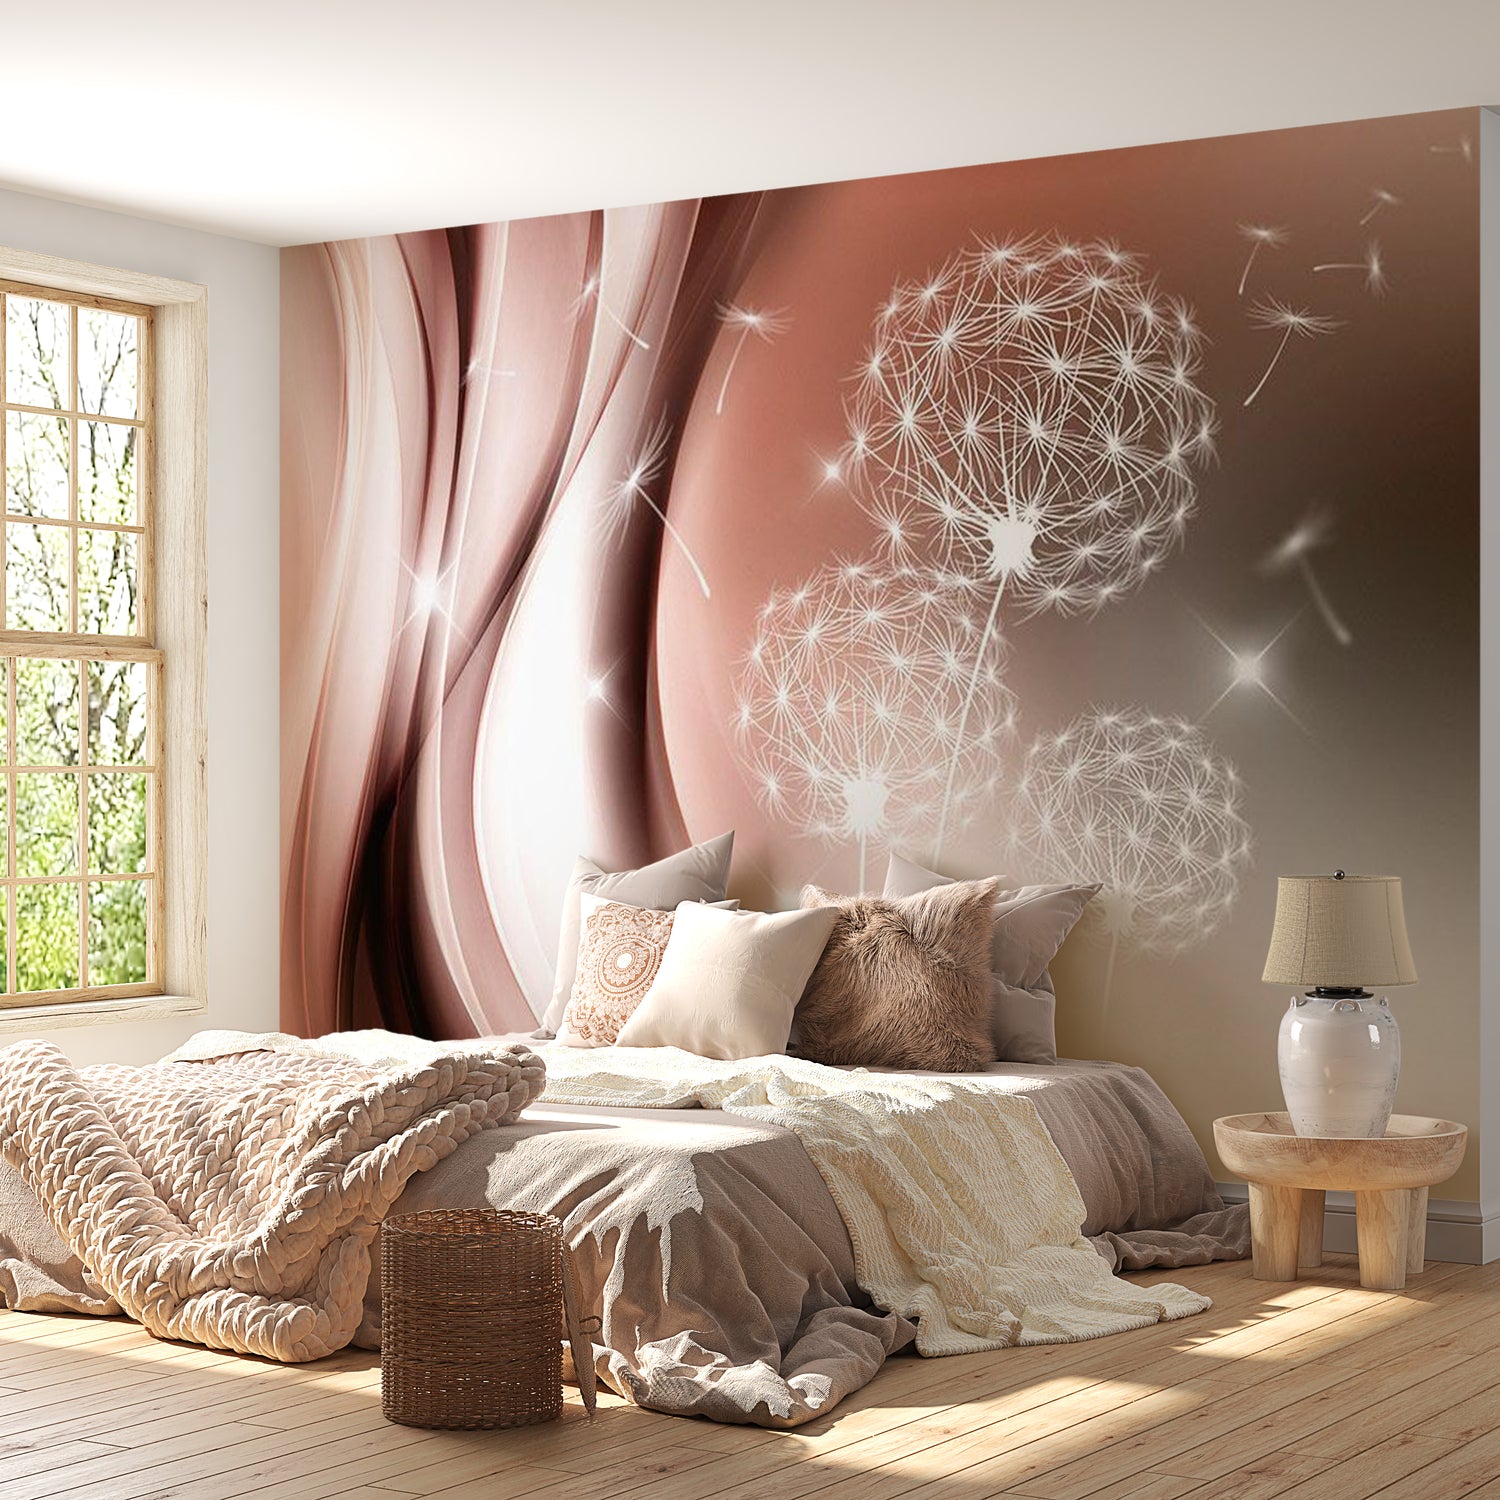 Floral Wallpaper Wall Mural - Glamour Dandelions